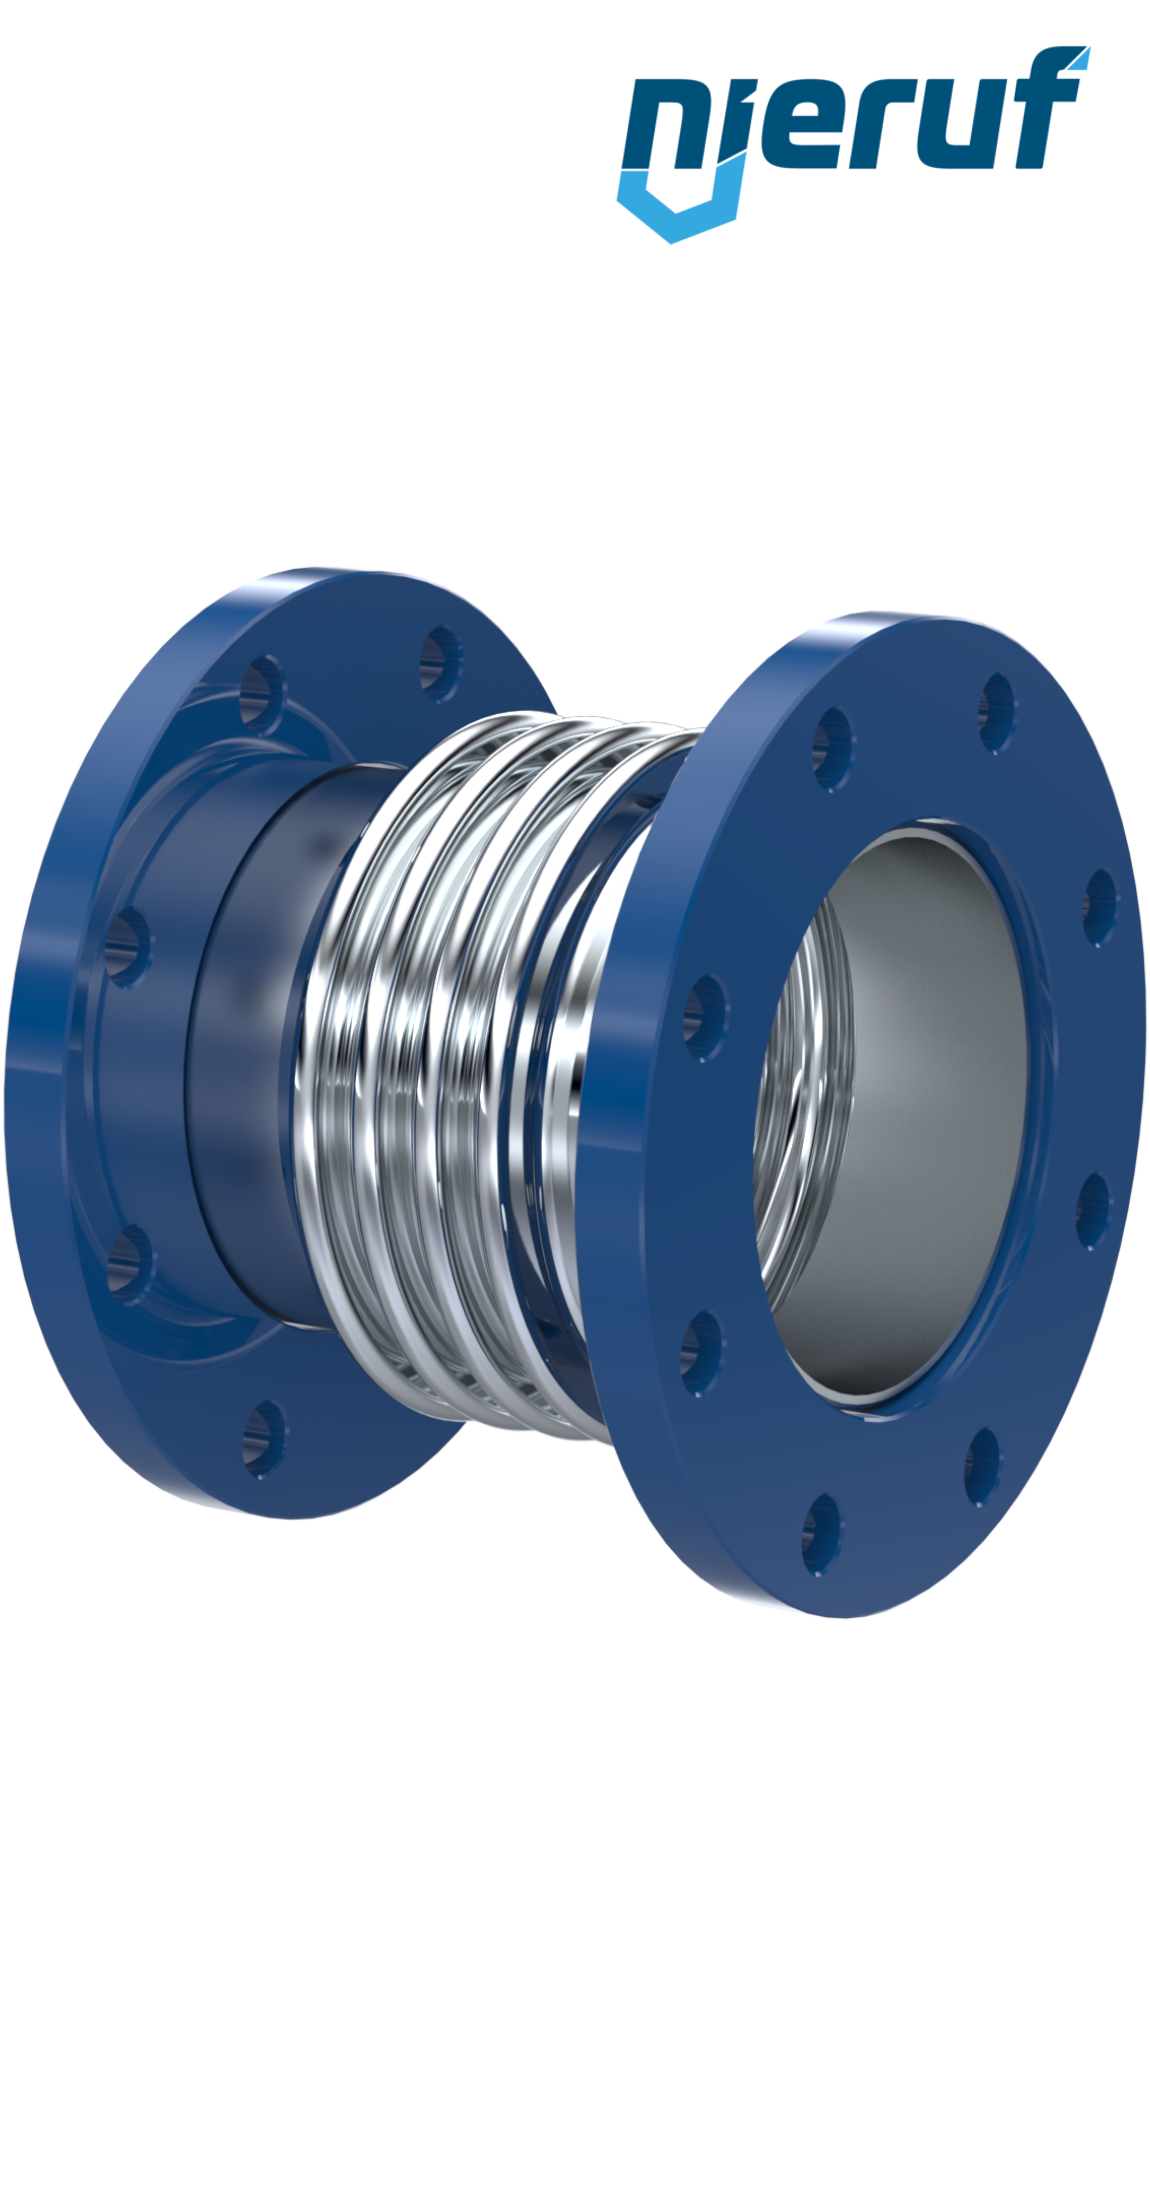 Axial expansion joint DN100 type KP05 fixed flanges and stainless steel-bellows